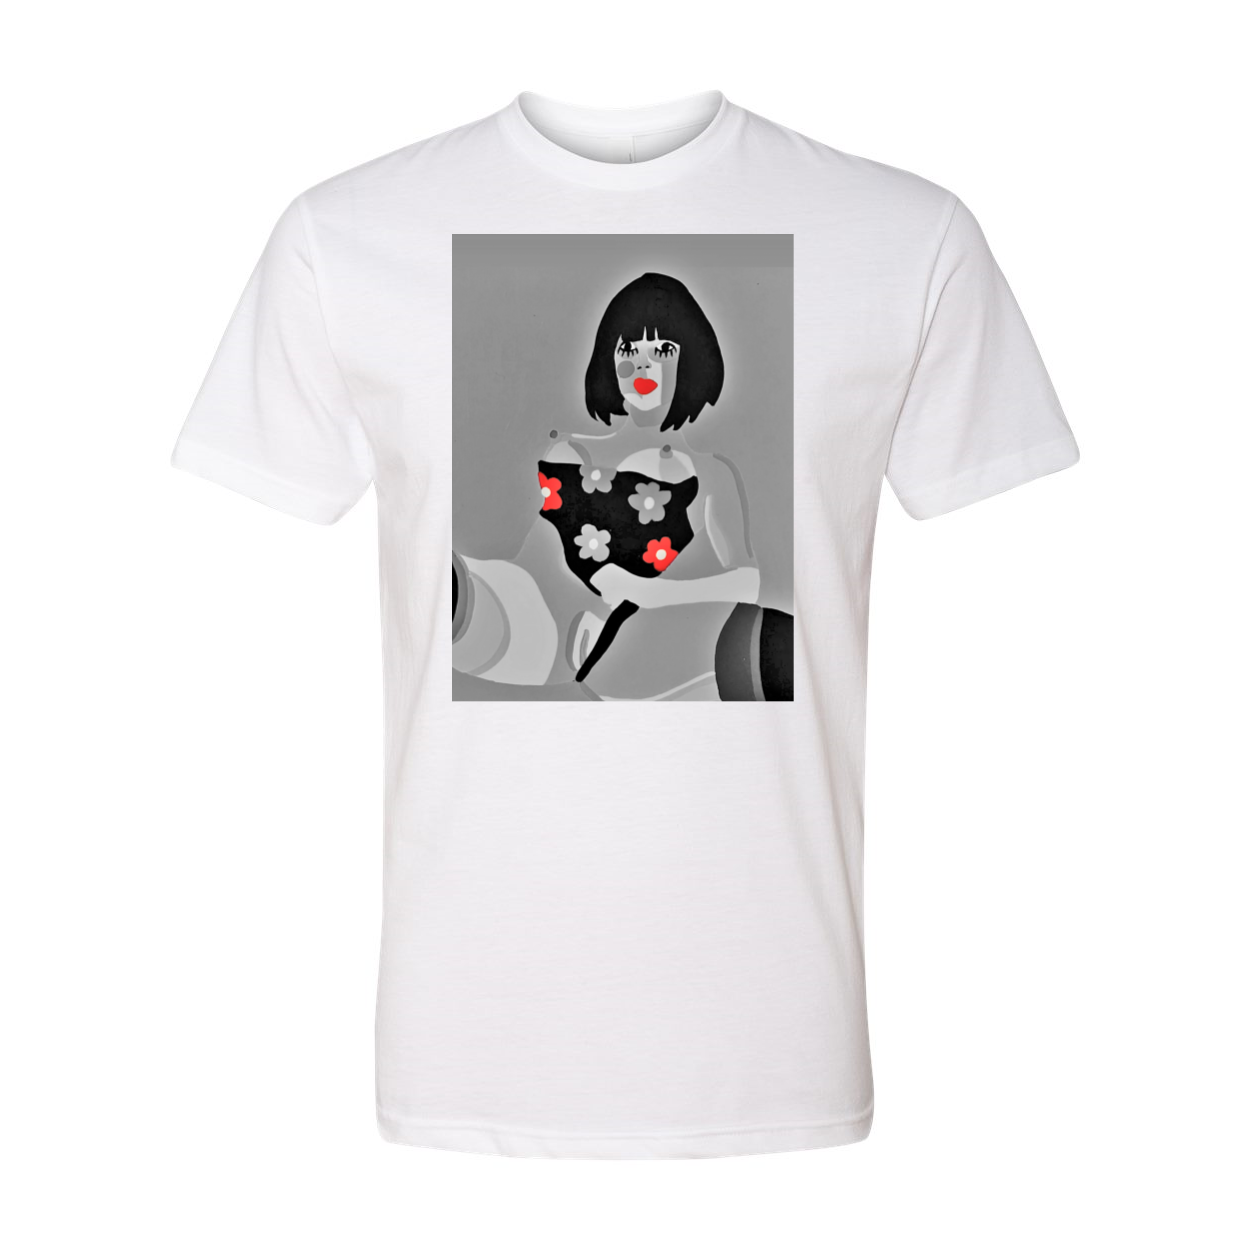 Knot-tee Doll Painting - Mature Content Apparel